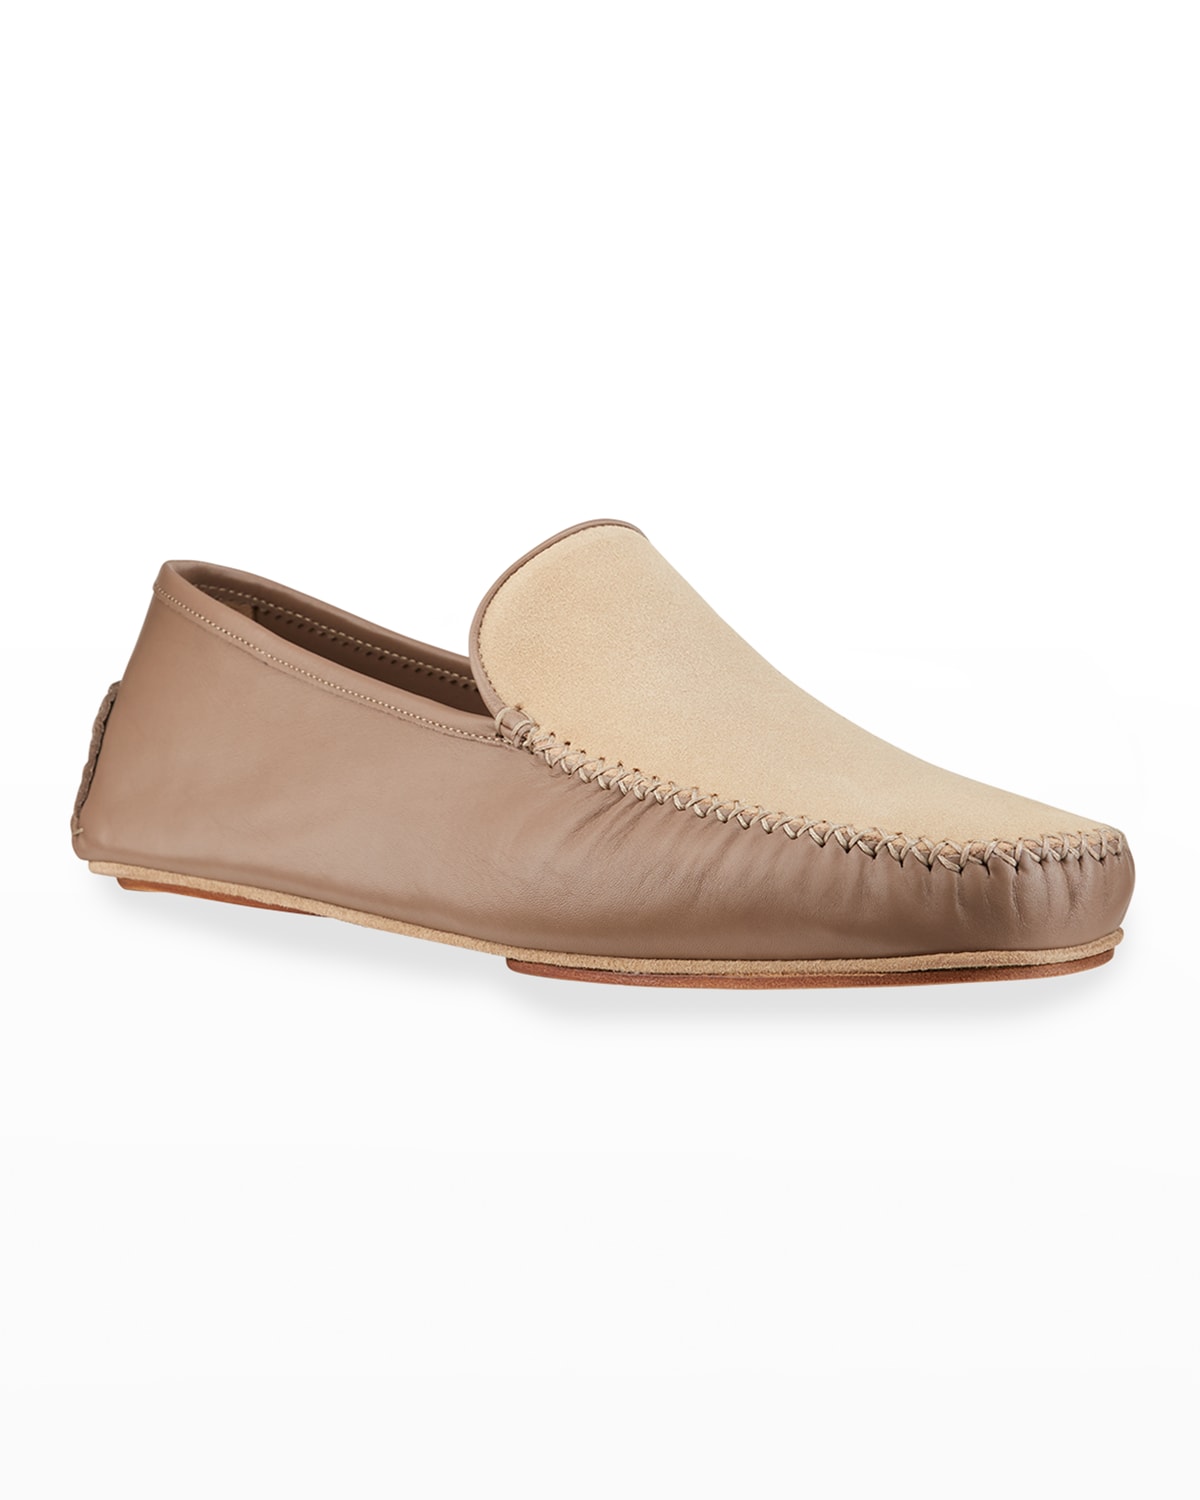 Men's Mayfair Suede and Leather Slippers